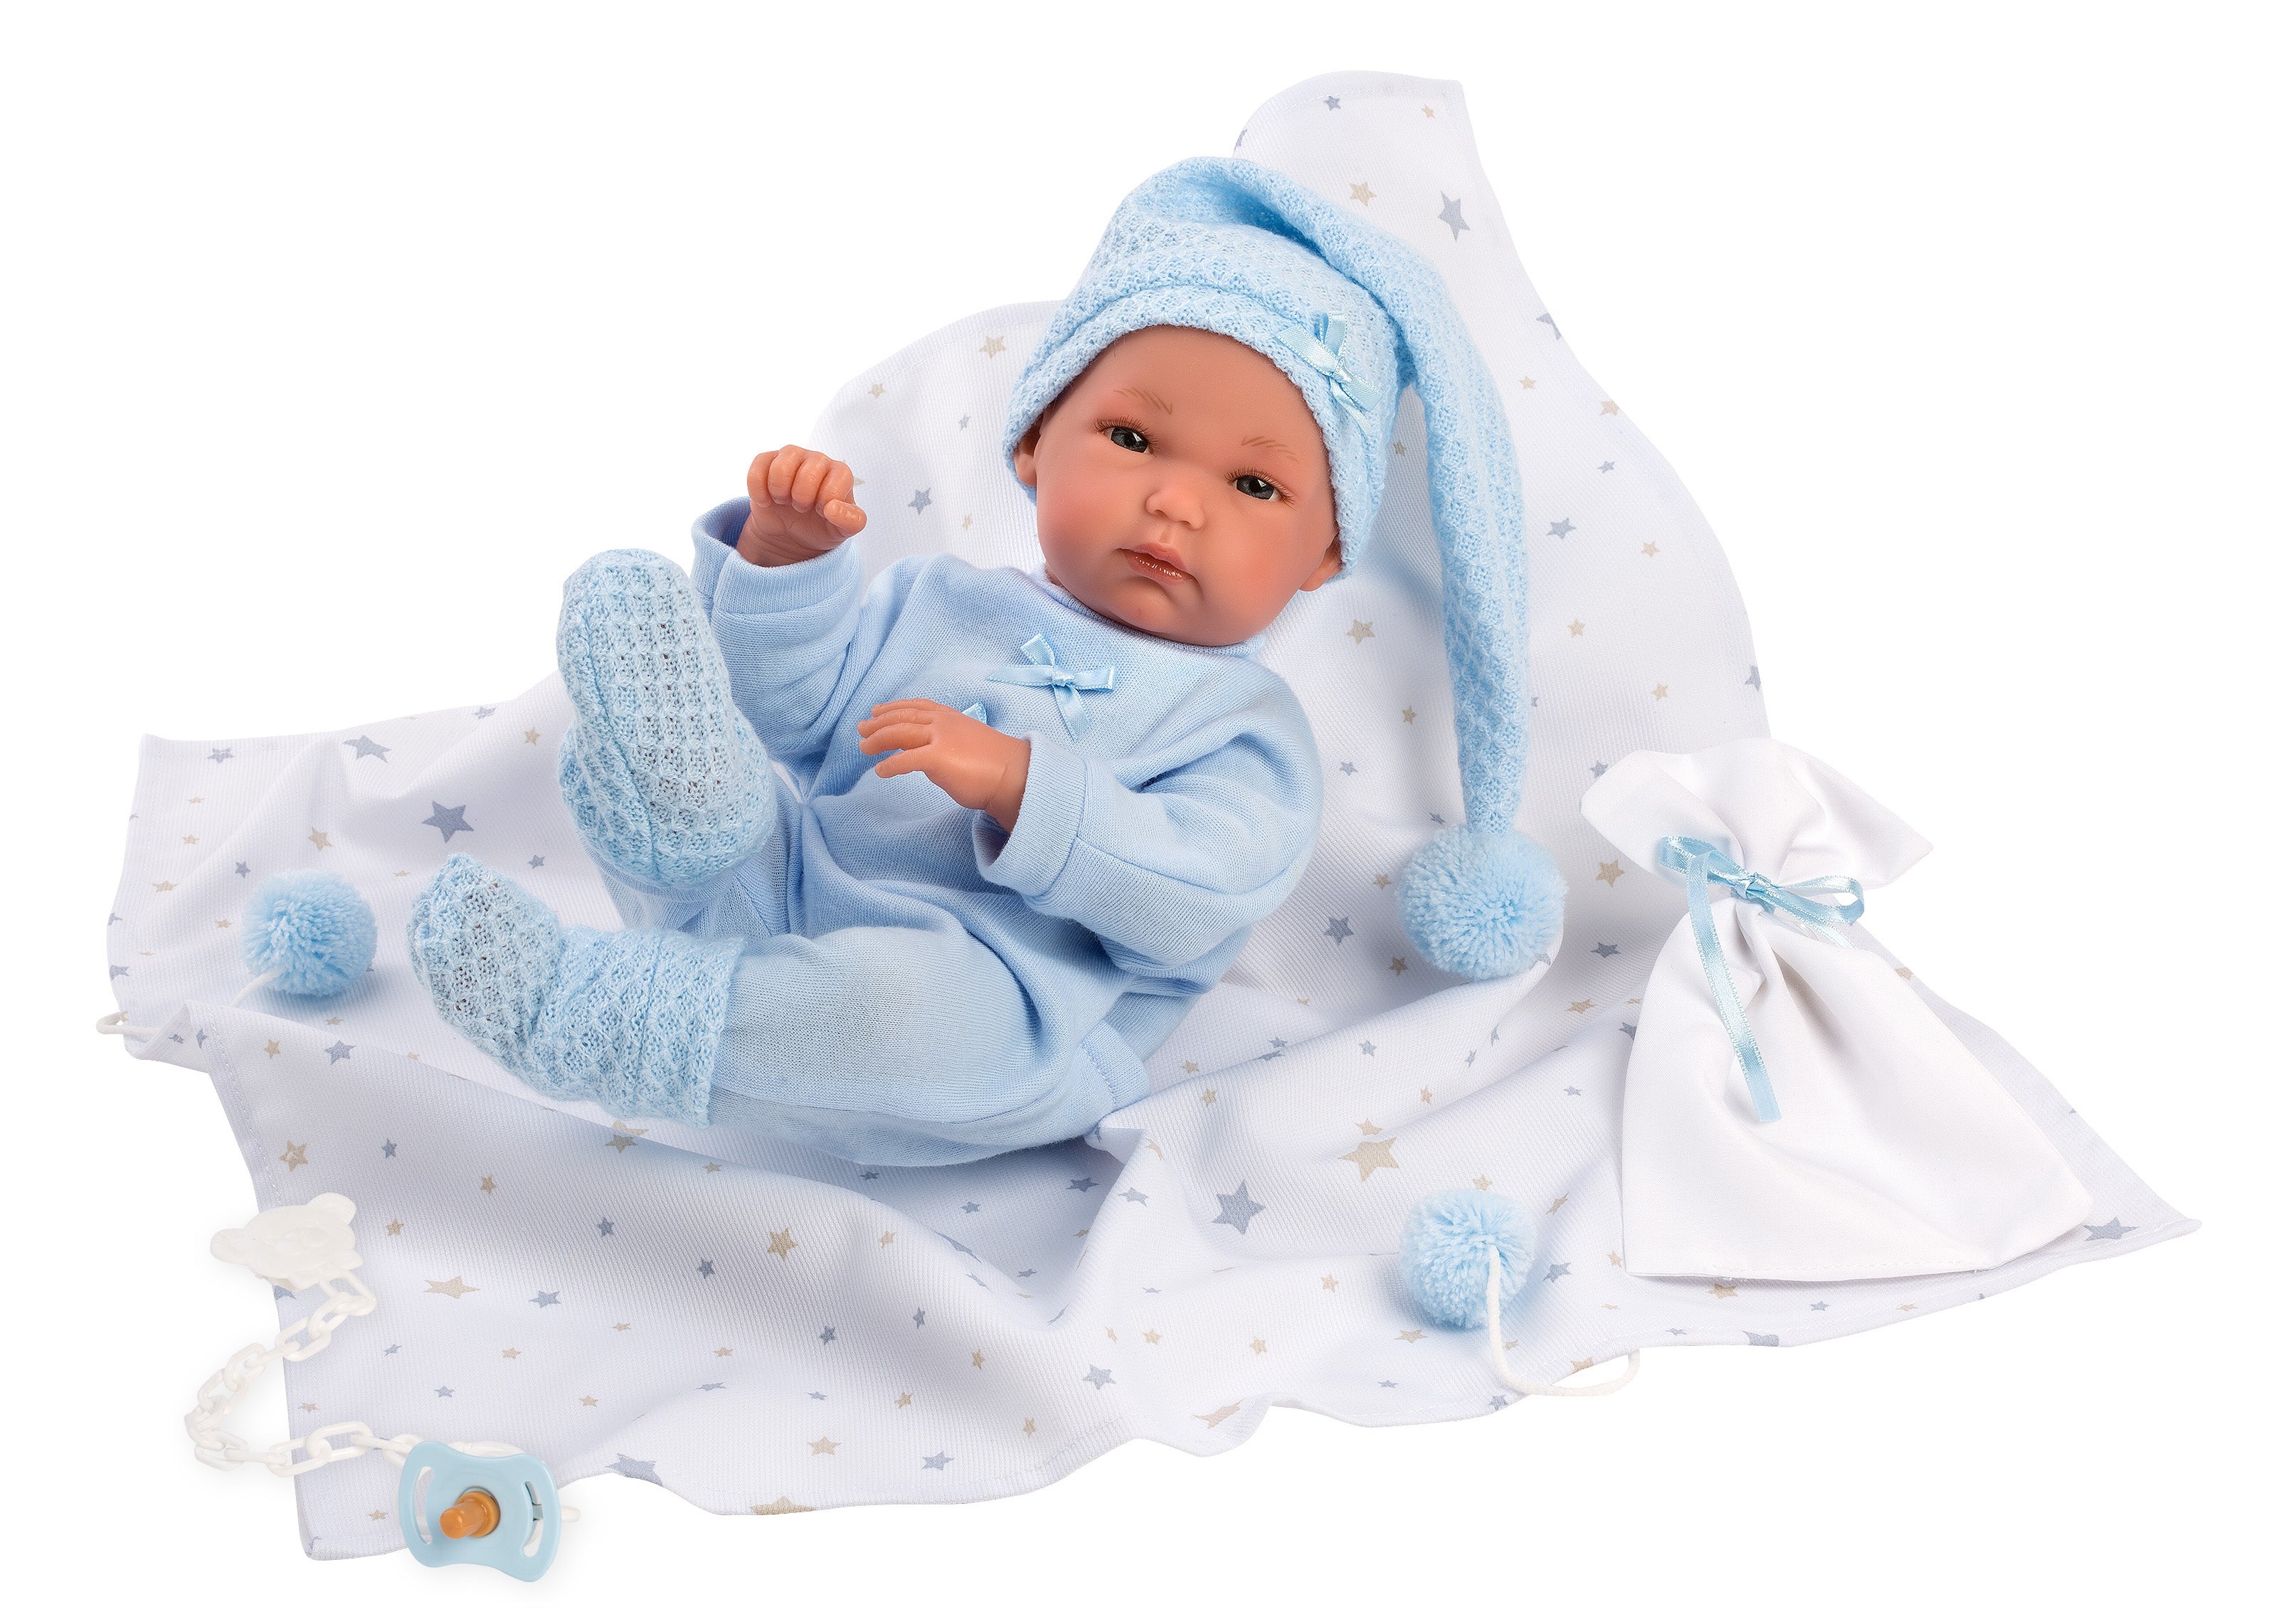 Llorens 13.8" Anatomically-correct Baby Doll Kayden With Blanket and Stocking Cap Dolls